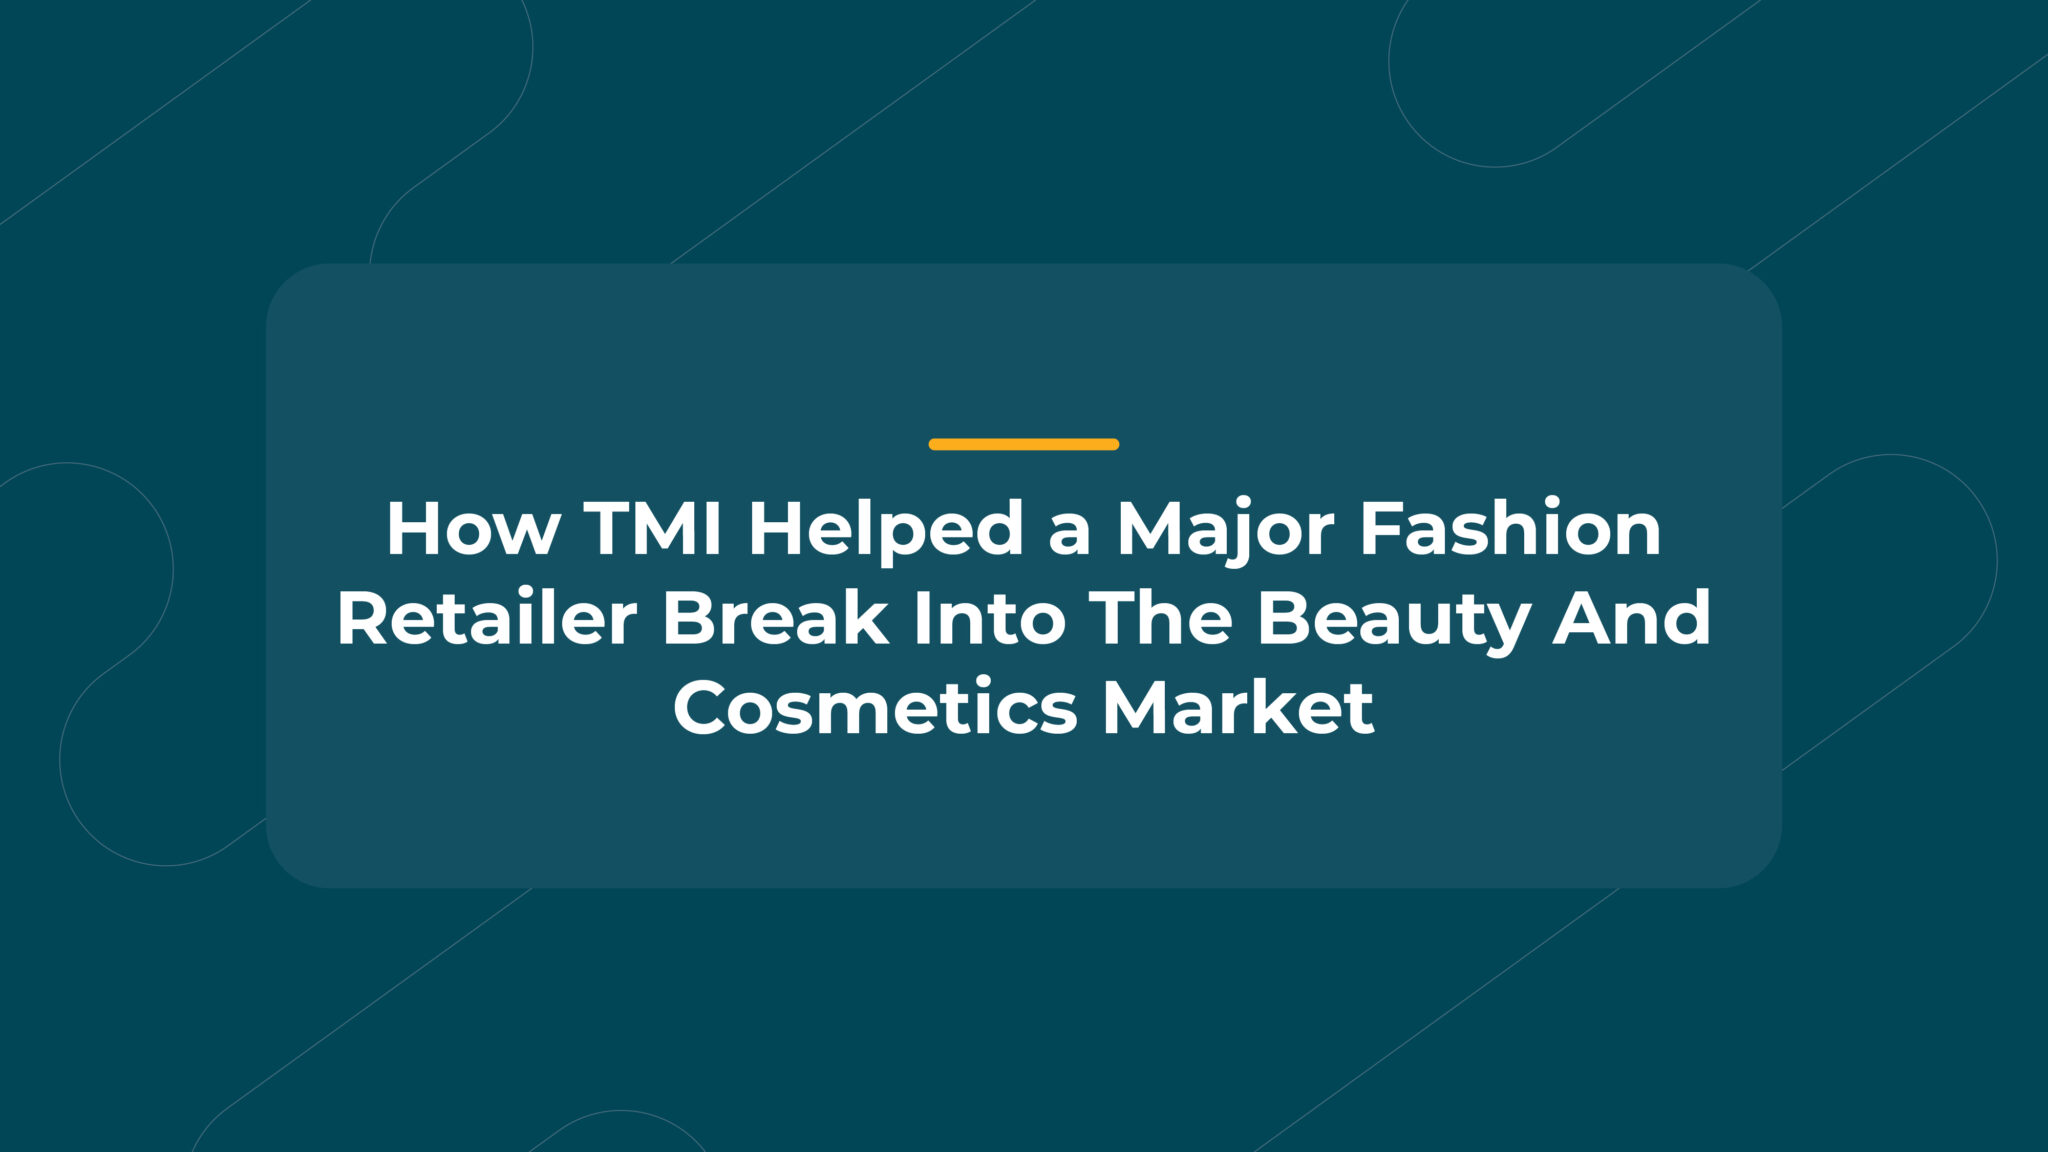 Using TMI to Tap into the Beauty Market: How a Major Fashion Retailer Did It